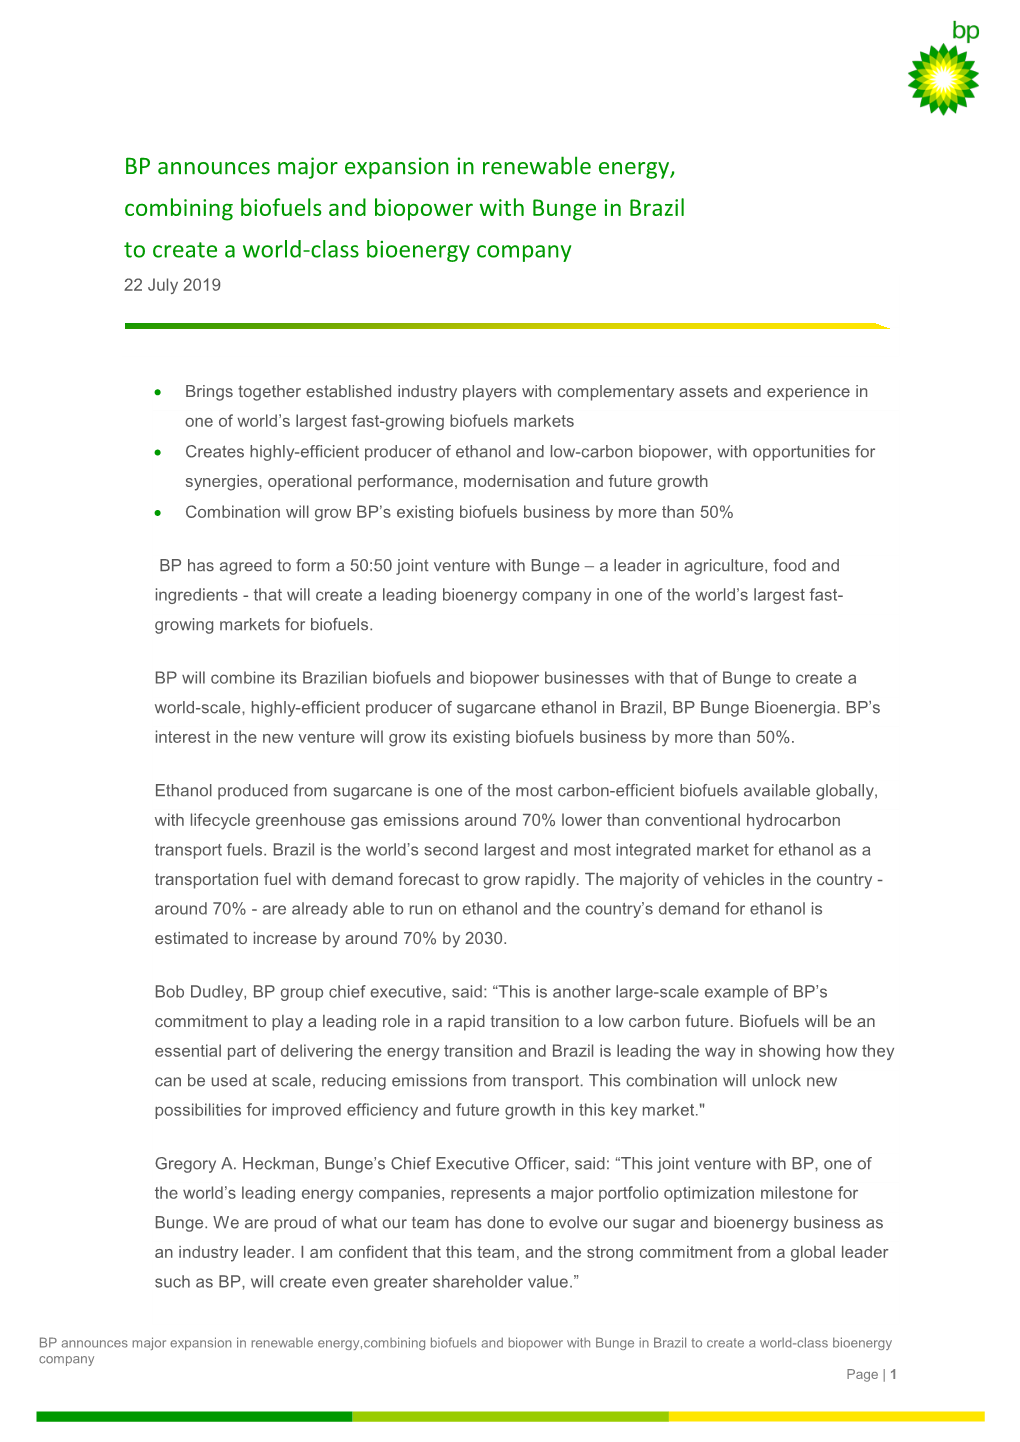 BP Announces Major Expansion in Renewable Energy, Combining Biofuels and Biopower with Bunge in Brazil to Create a World-Class Bioenergy Company 22 July 2019